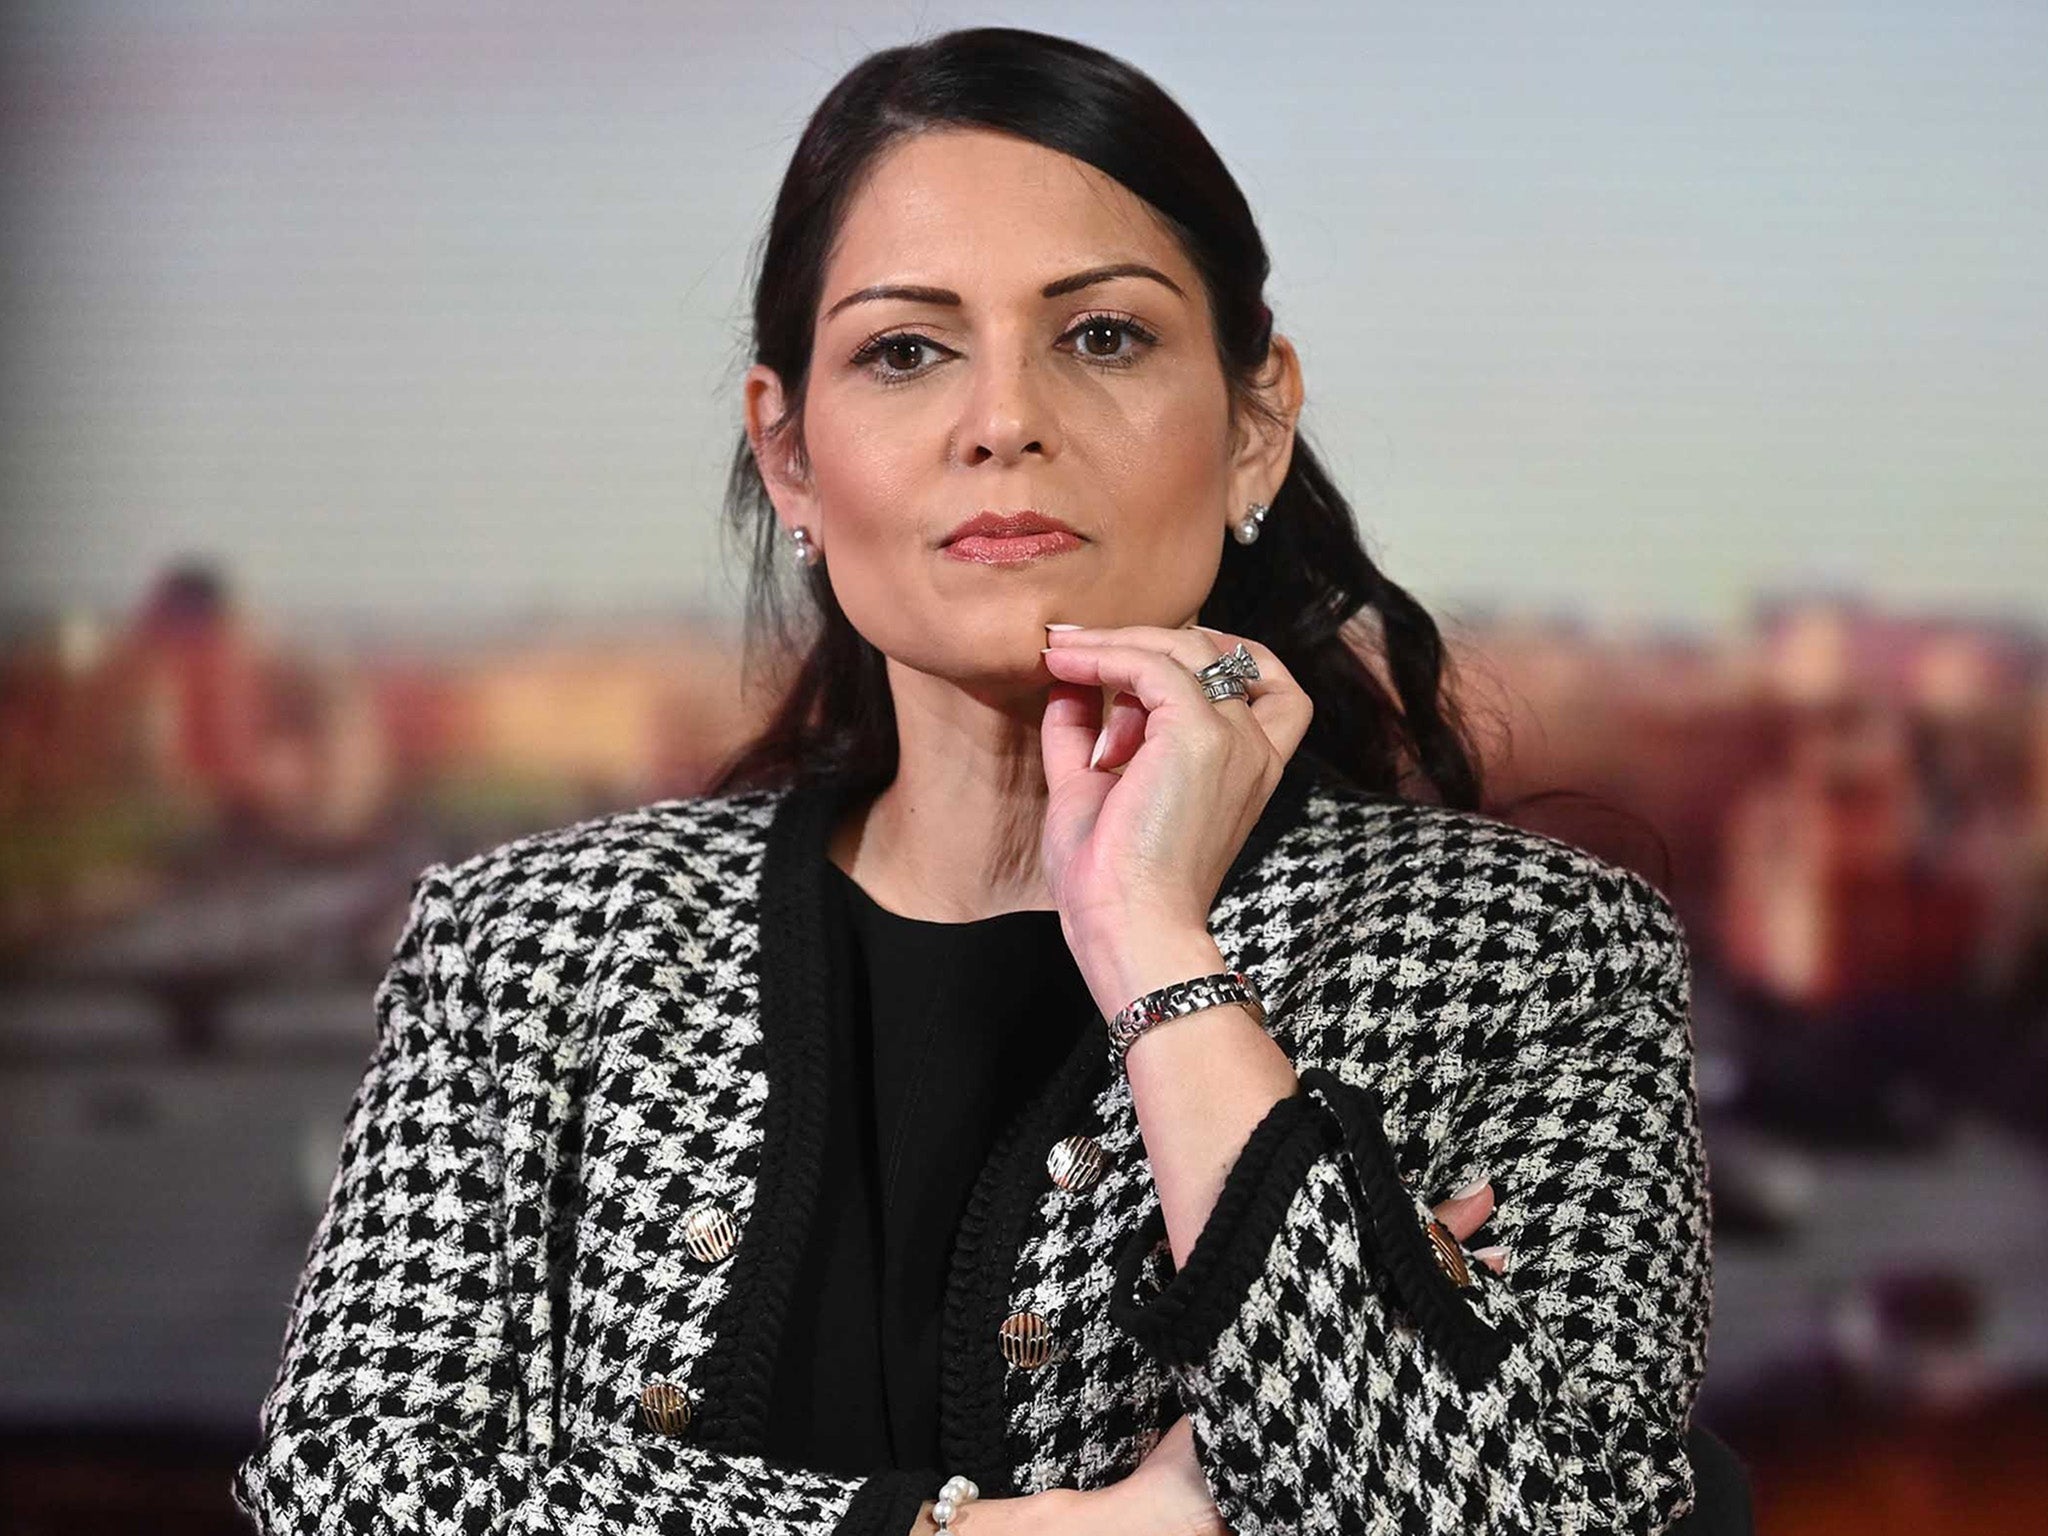 Open letter calls on Priti Patel to lift the ban on work for people seeking asylum in order to alleviate the UK’s ‘recruitment crisis’